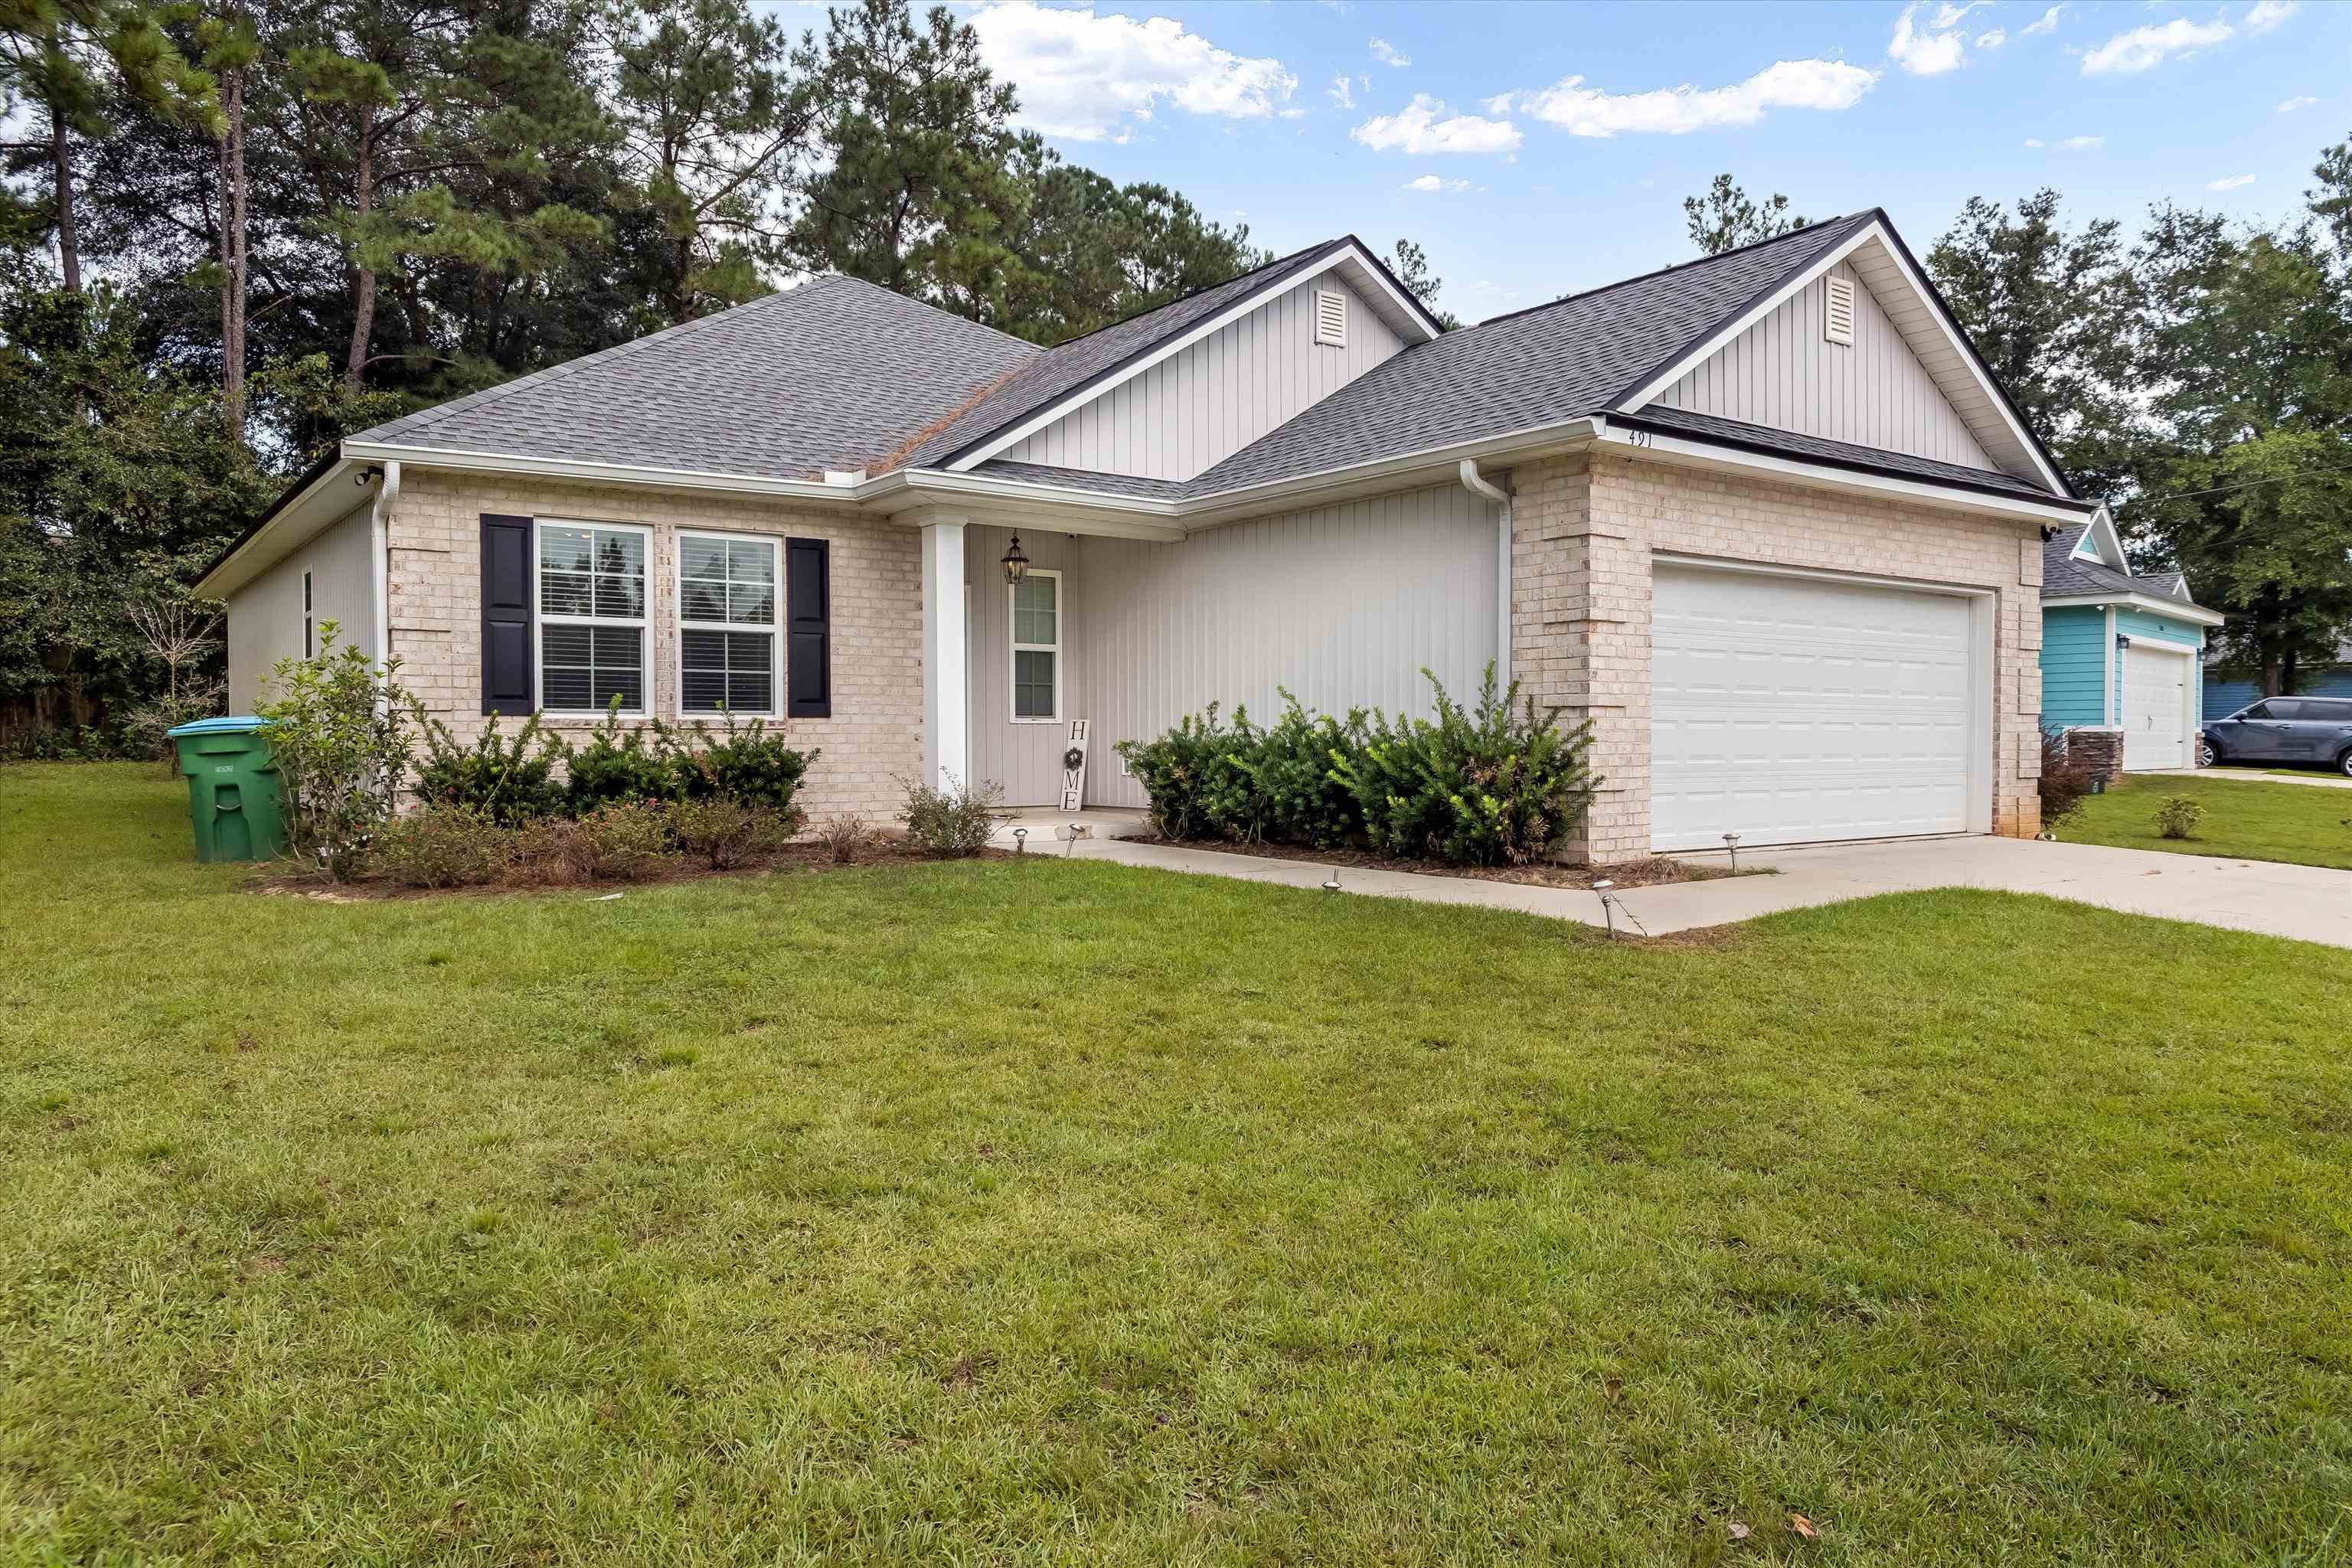 491 Sand Pine Circle,MIDWAY,Florida 32343,4 Bedrooms Bedrooms,2 BathroomsBathrooms,Detached single family,491 Sand Pine Circle,368116